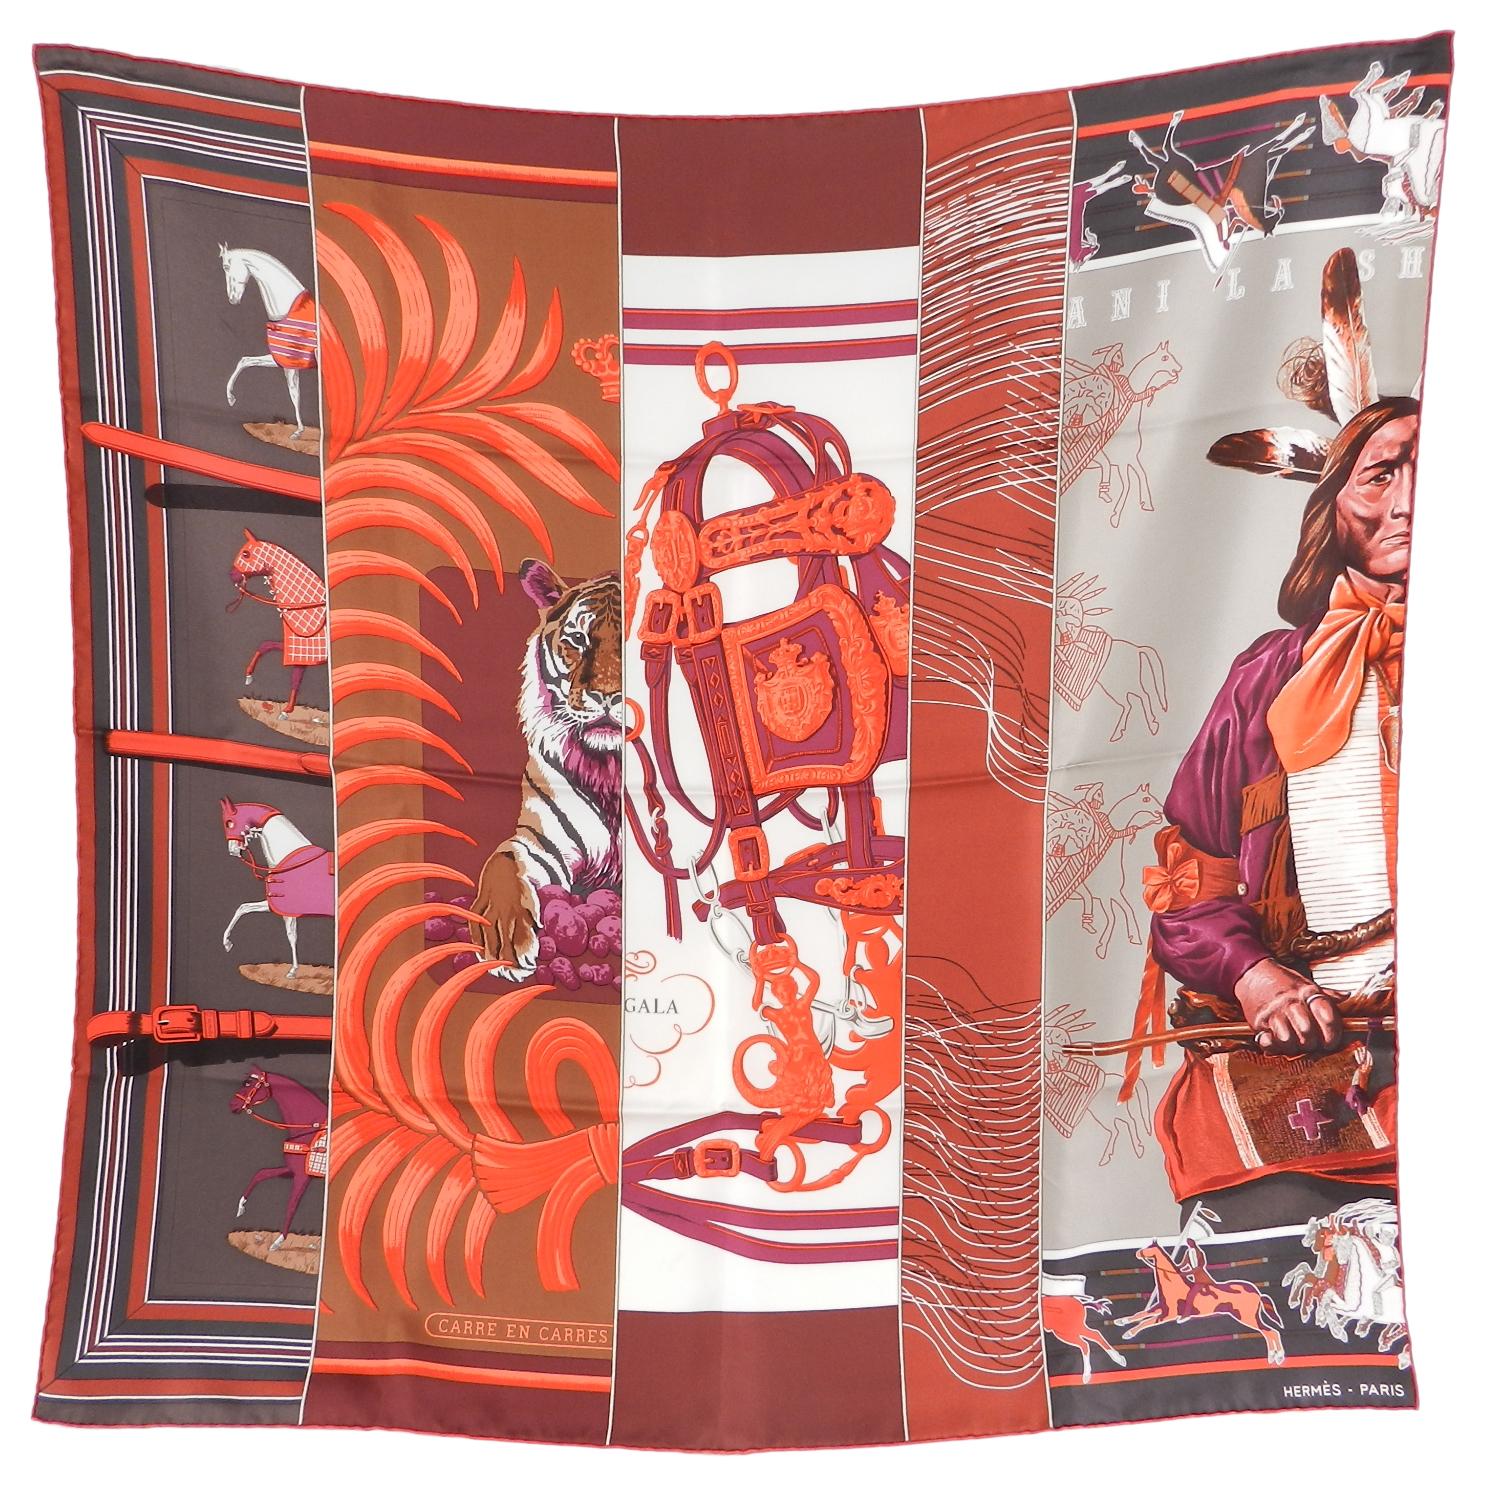 Hermes Carre en Carres 90cm Silk Twill Scarf and Knotting Cards.  This scarf features a collaged design featuring several of Hermes’ most popular scarves.  Brick red, burgundy, white, orange, tomato red, brown, dark plum.  Includes box, exchange